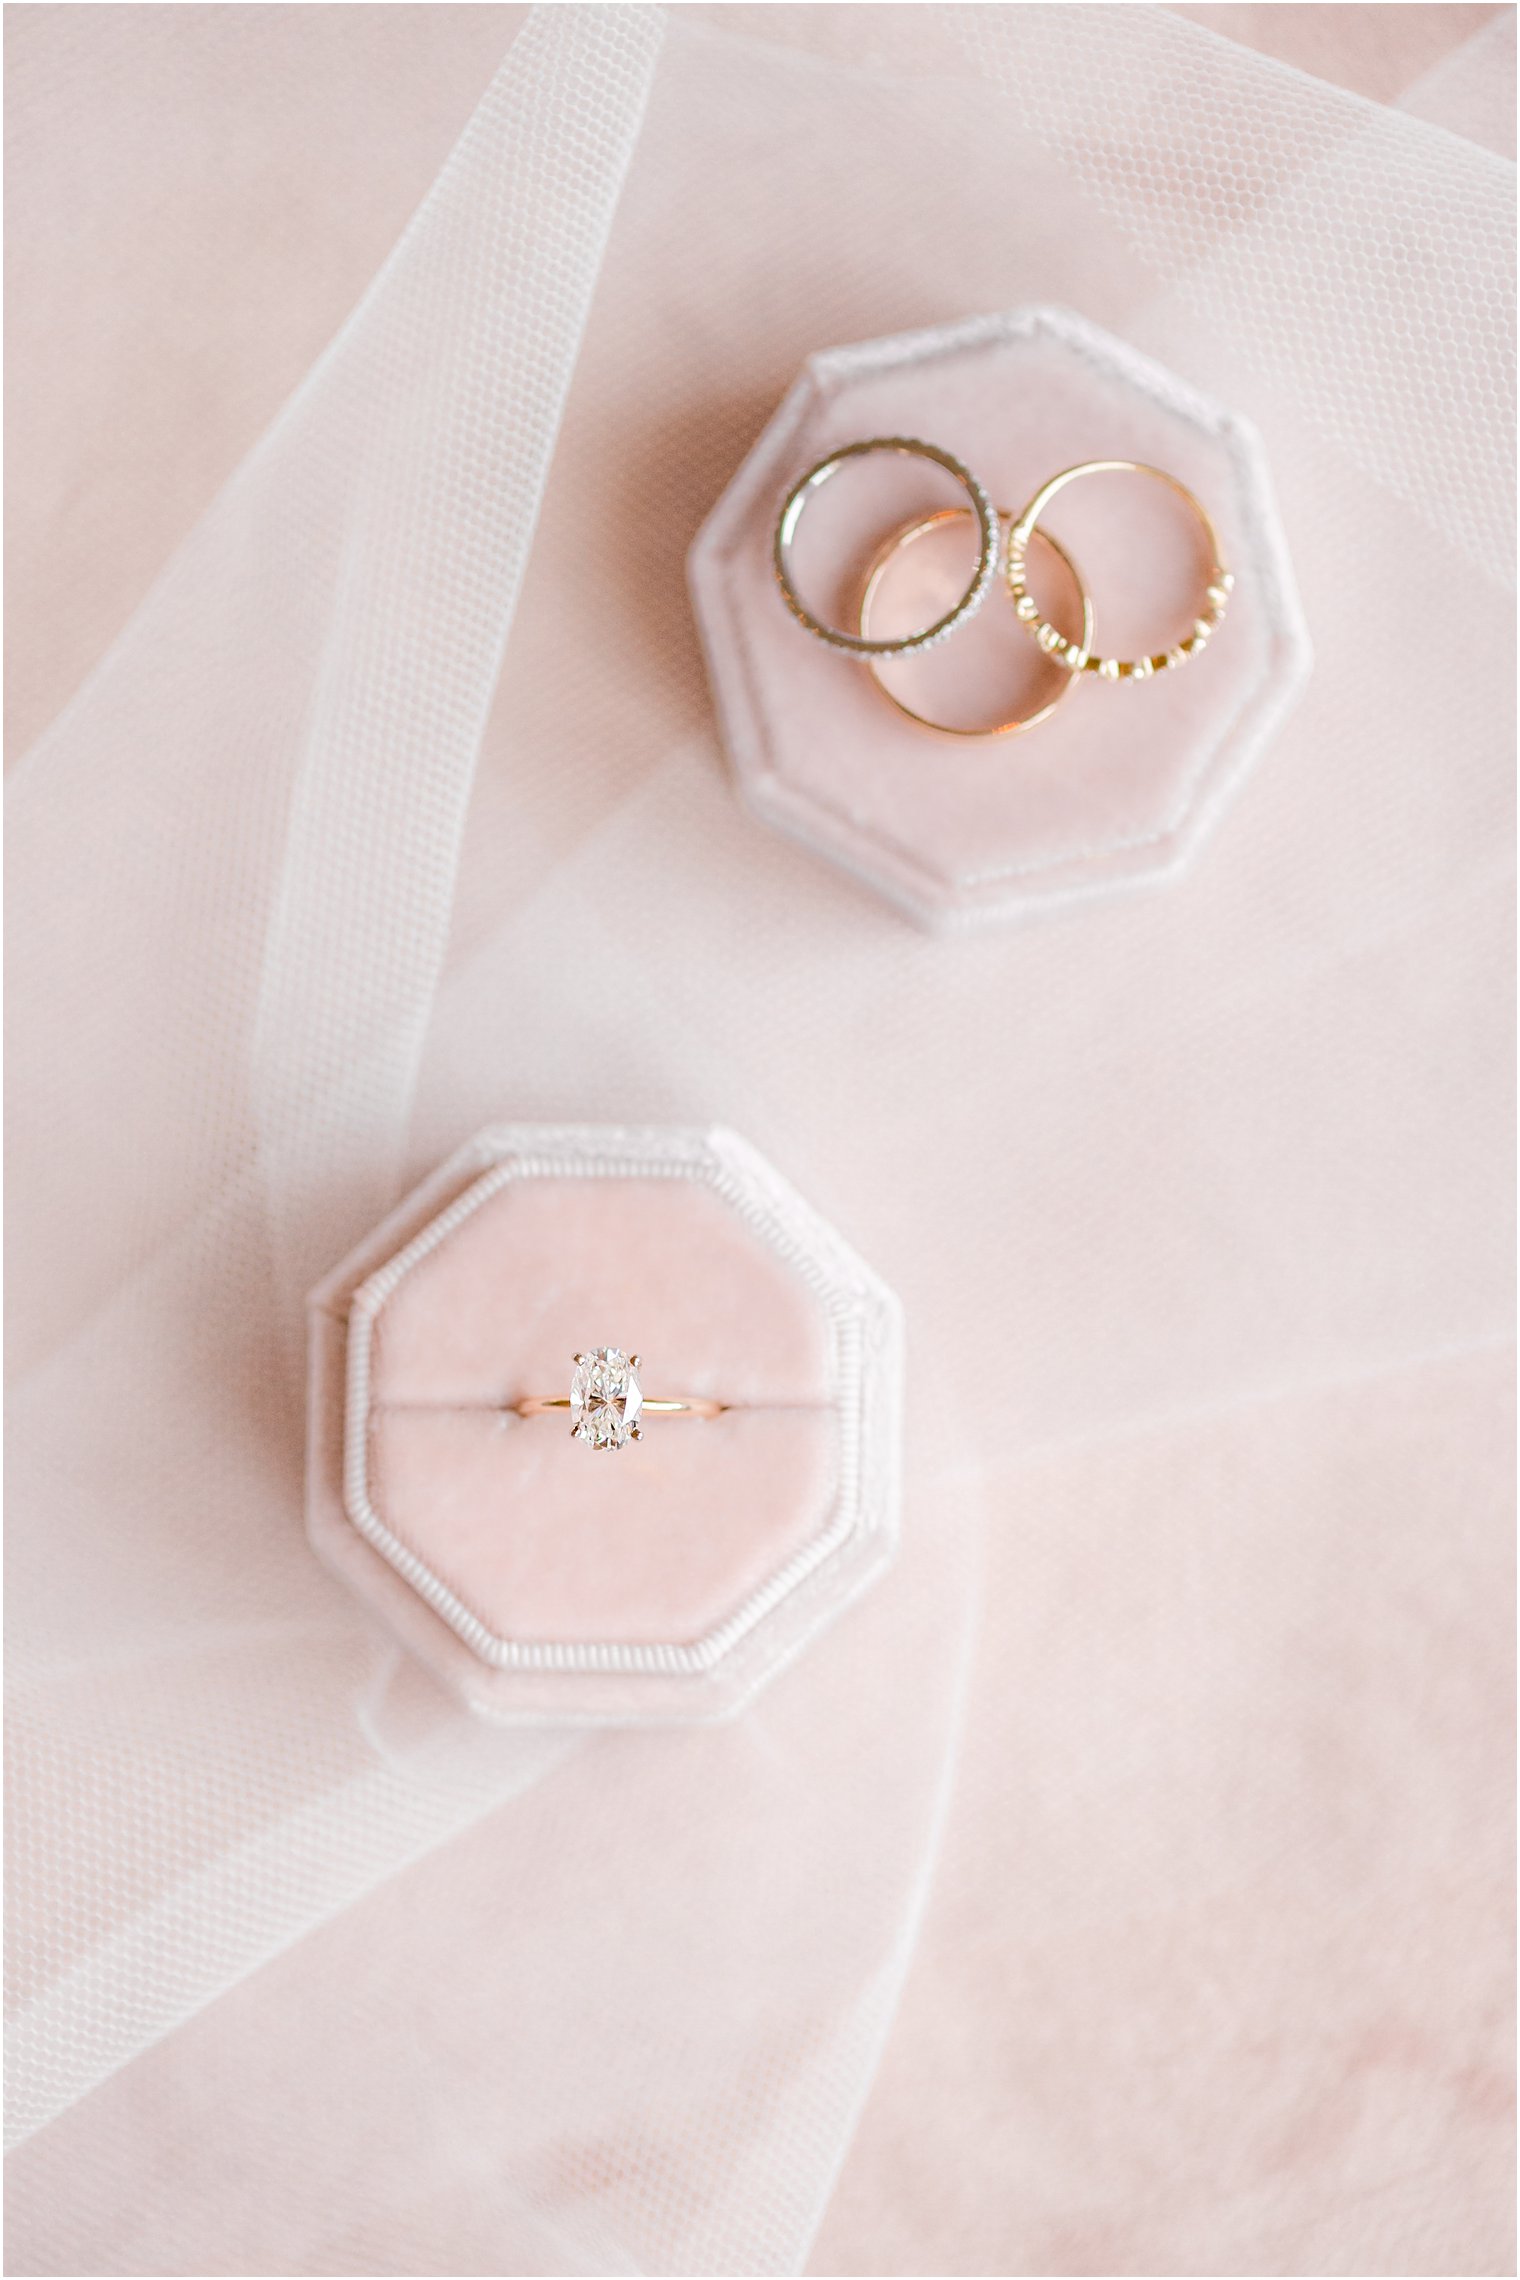 gold and diamond engagement ring rests in pale pink ring box